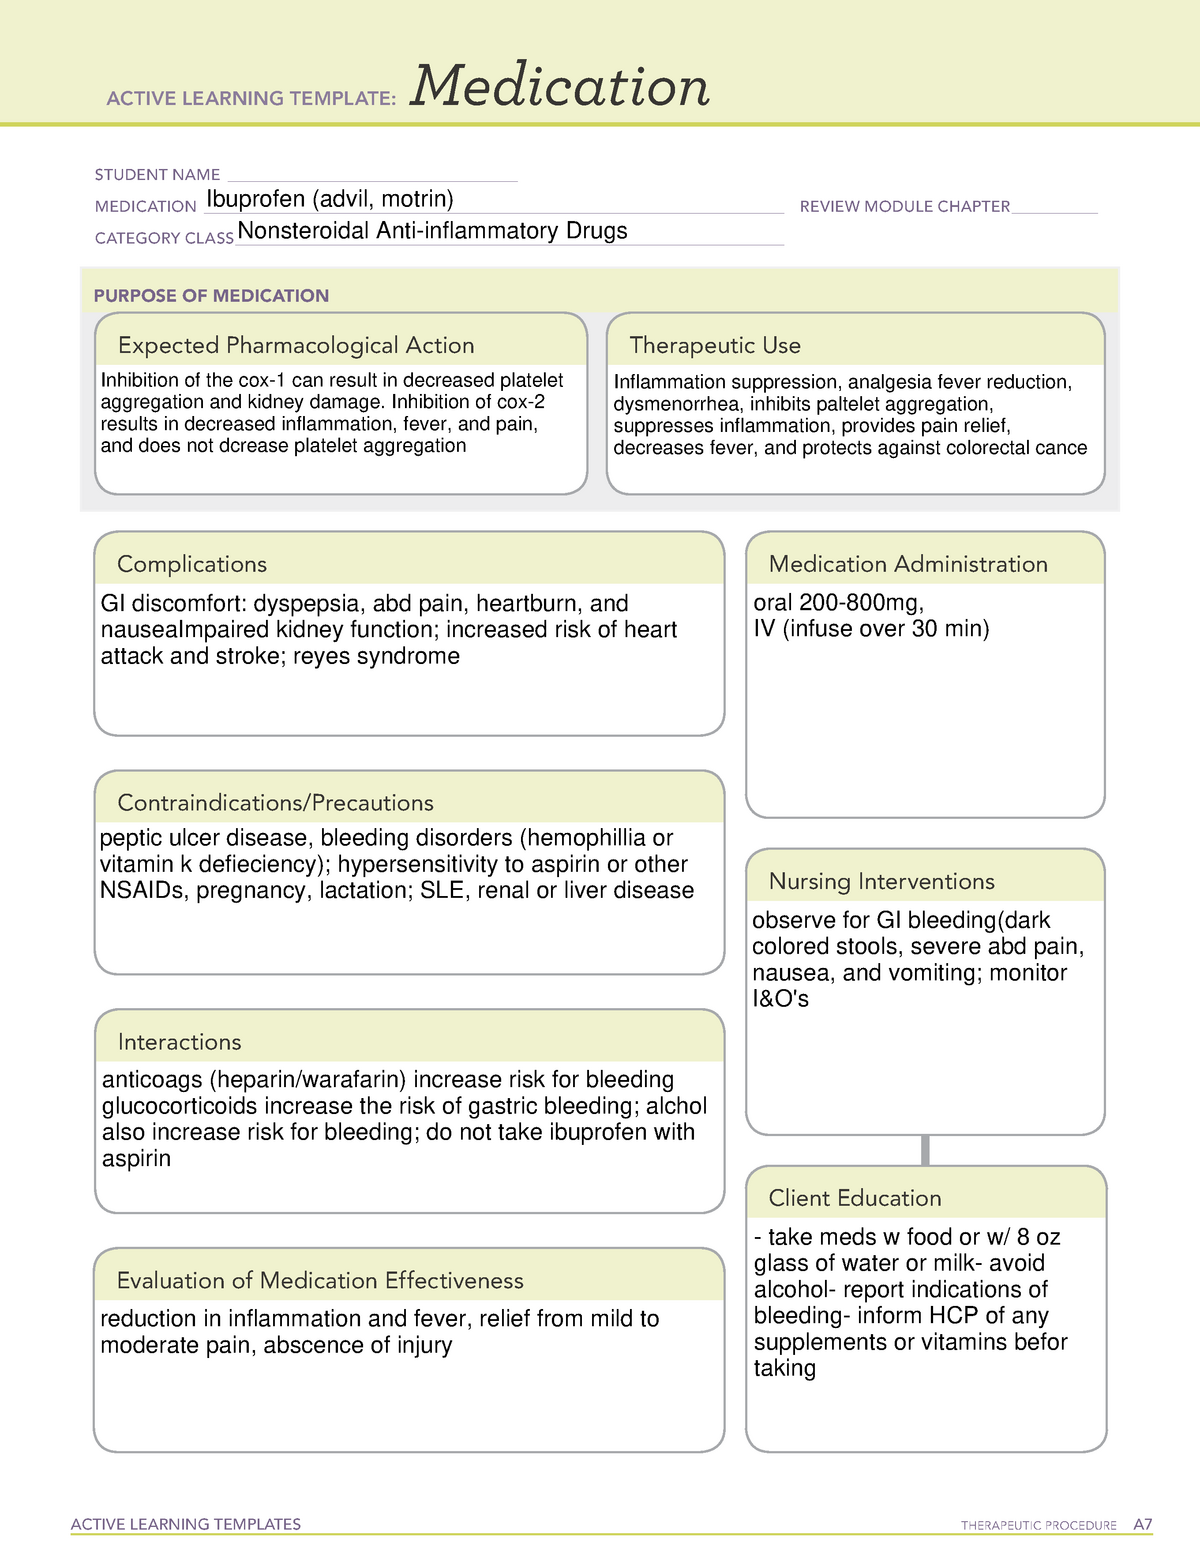 Ibuprofen ACTIVE LEARNING TEMPLATE ACTIVE LEARNING TEMPLATES